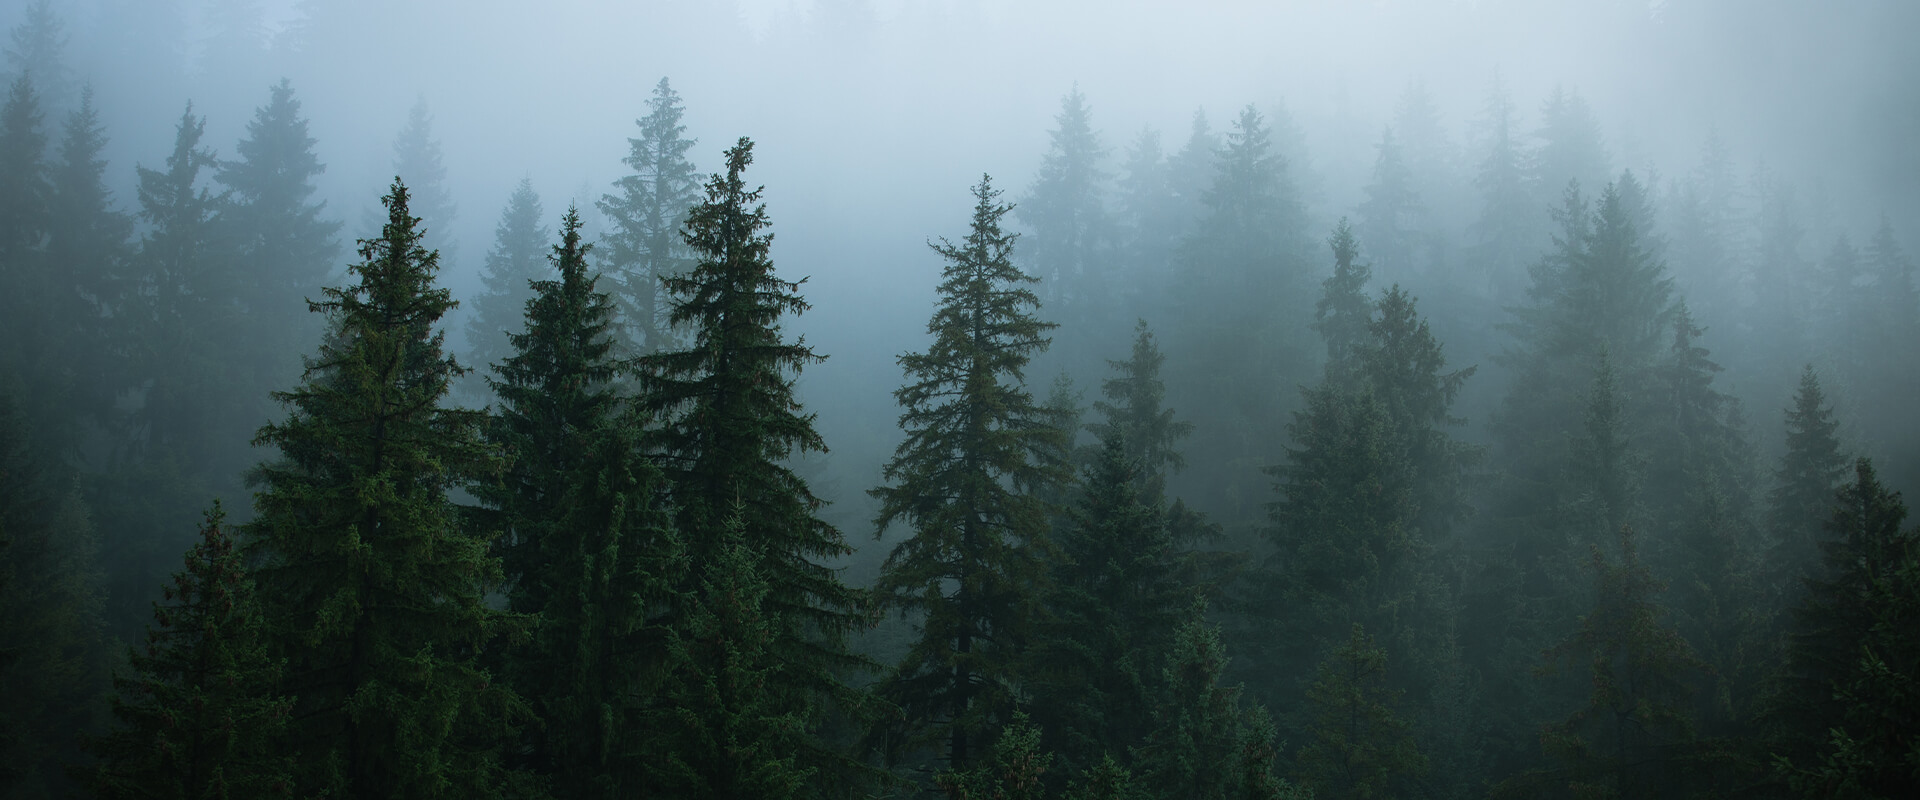 Forest with mist at dusk.